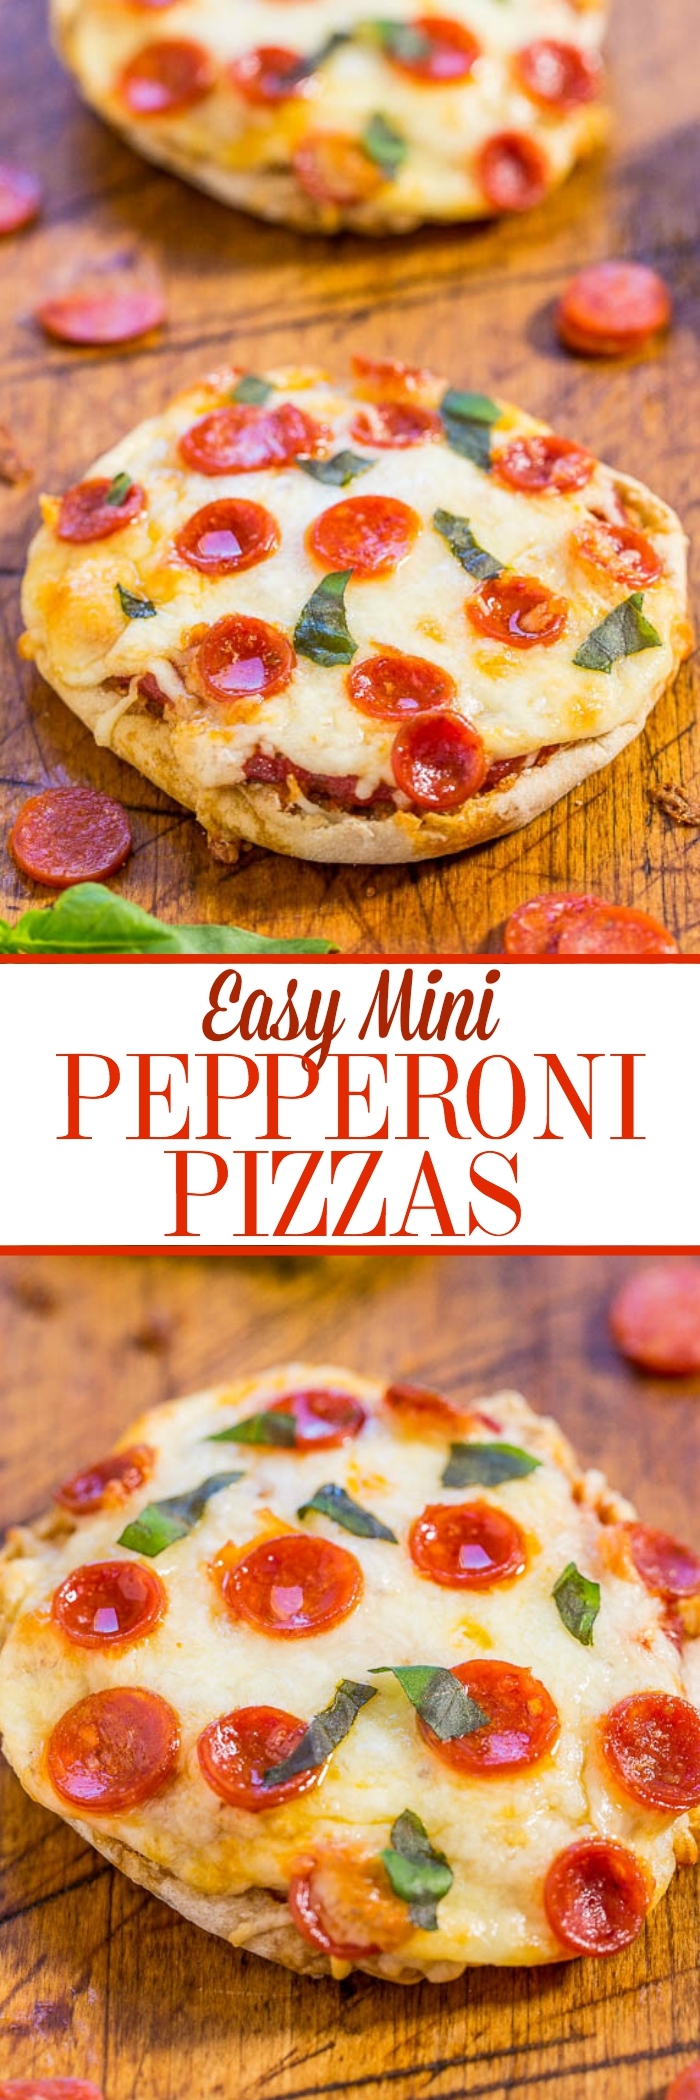 Easy Mini Pepperoni Pizzas - Ready in 10 minutes, mindlessly easy, and mini food just tastes better!! Great as an appetizer, after-school or late-night snack, or as perfect tailgating party food!!